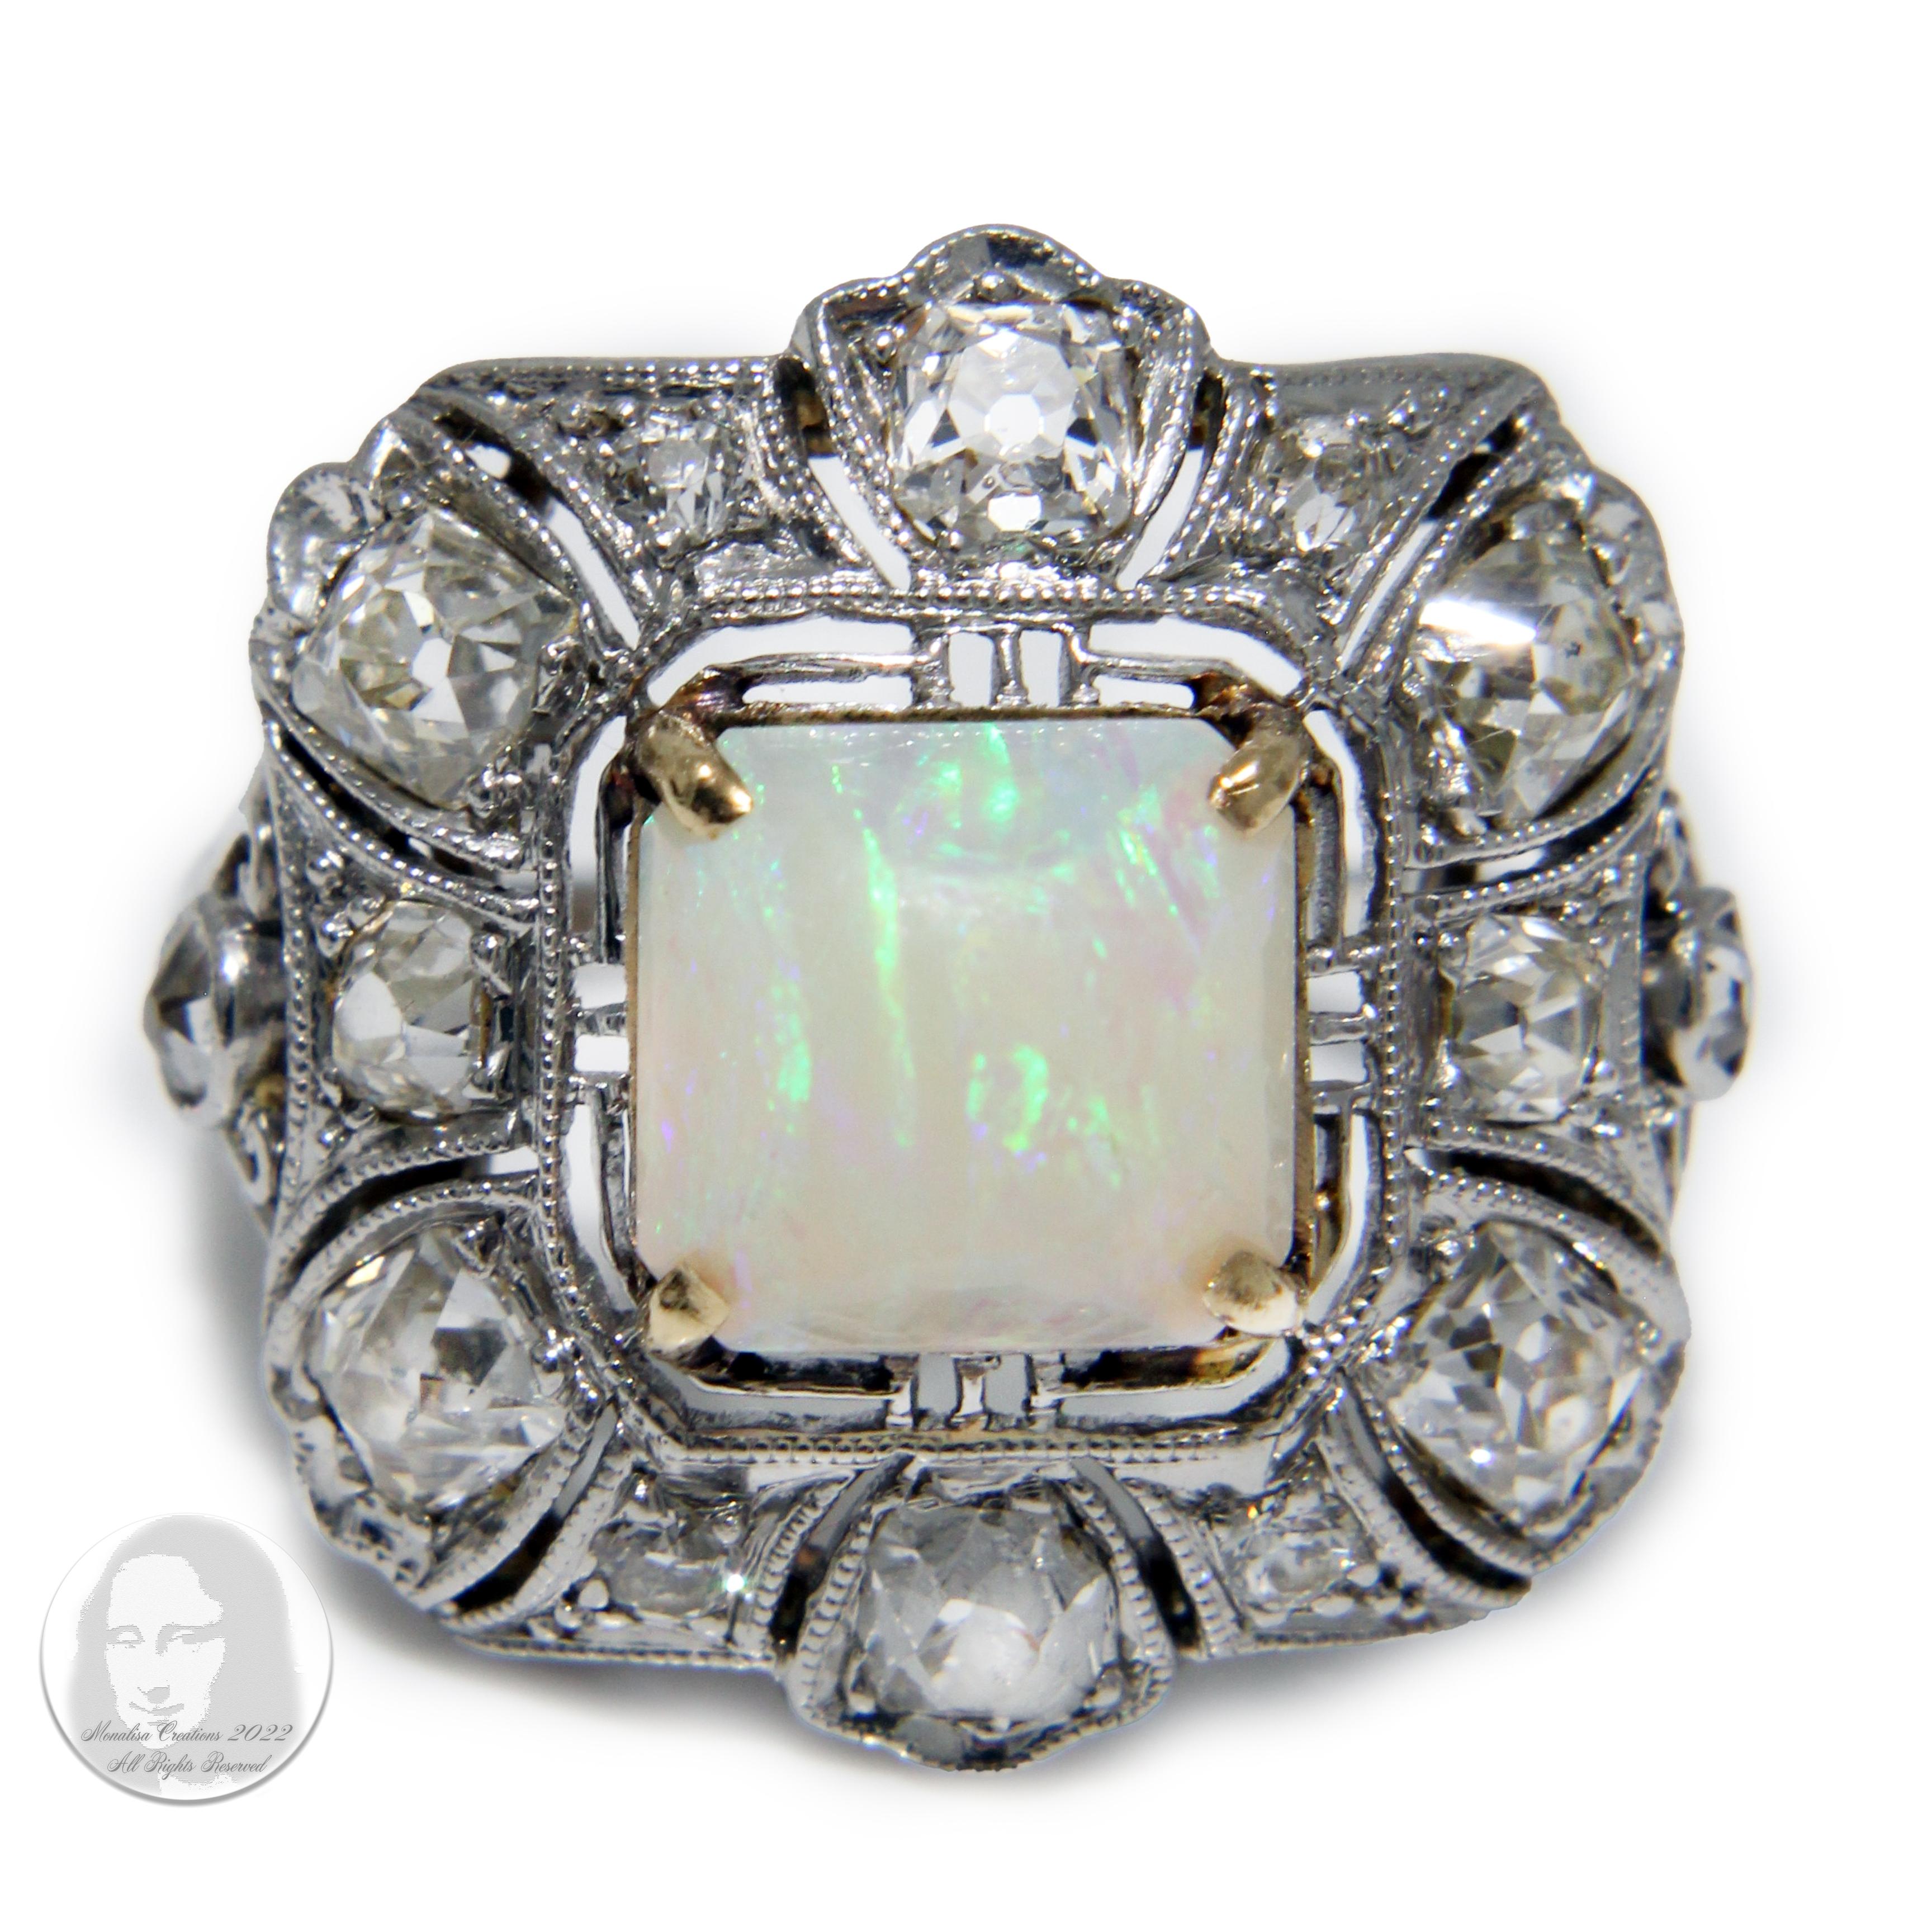 Opal and Diamond Cocktail Ring Art Deco Style Vintage Platinum Rare Early 20th C In Fair Condition For Sale In Port Saint Lucie, FL